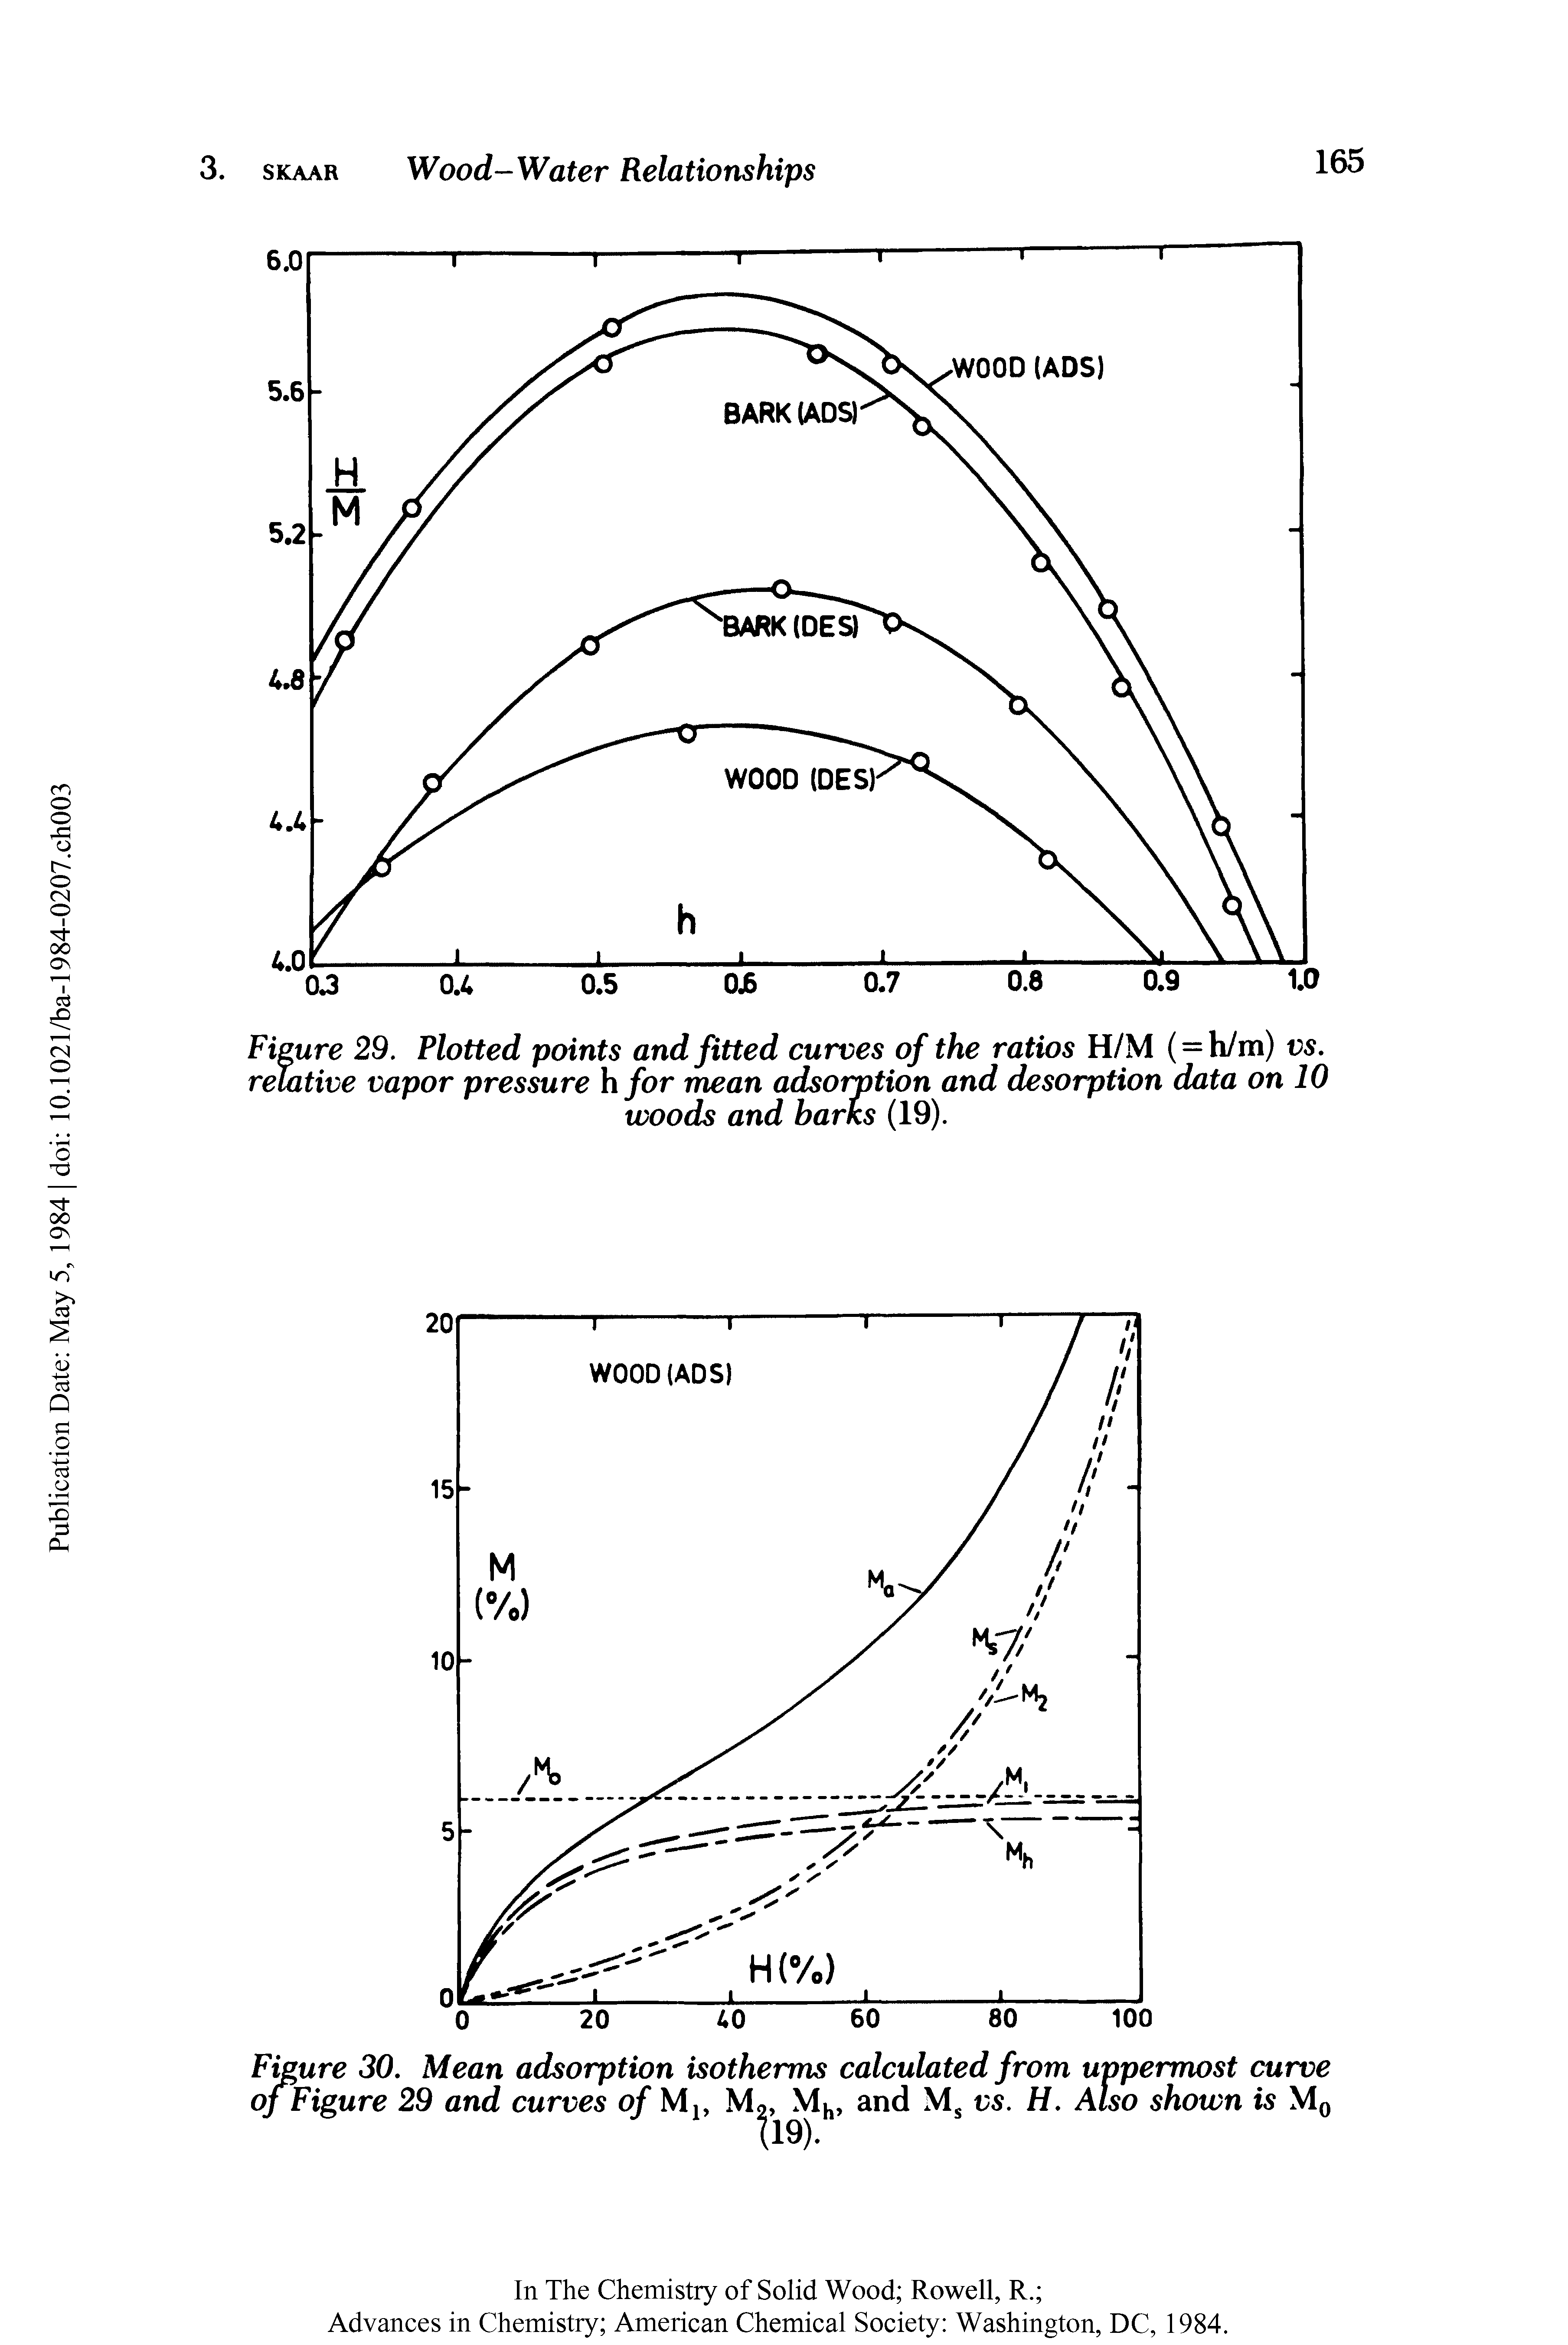 Figure 30. Mean adsorption isotherms calculated from uppermost curve...